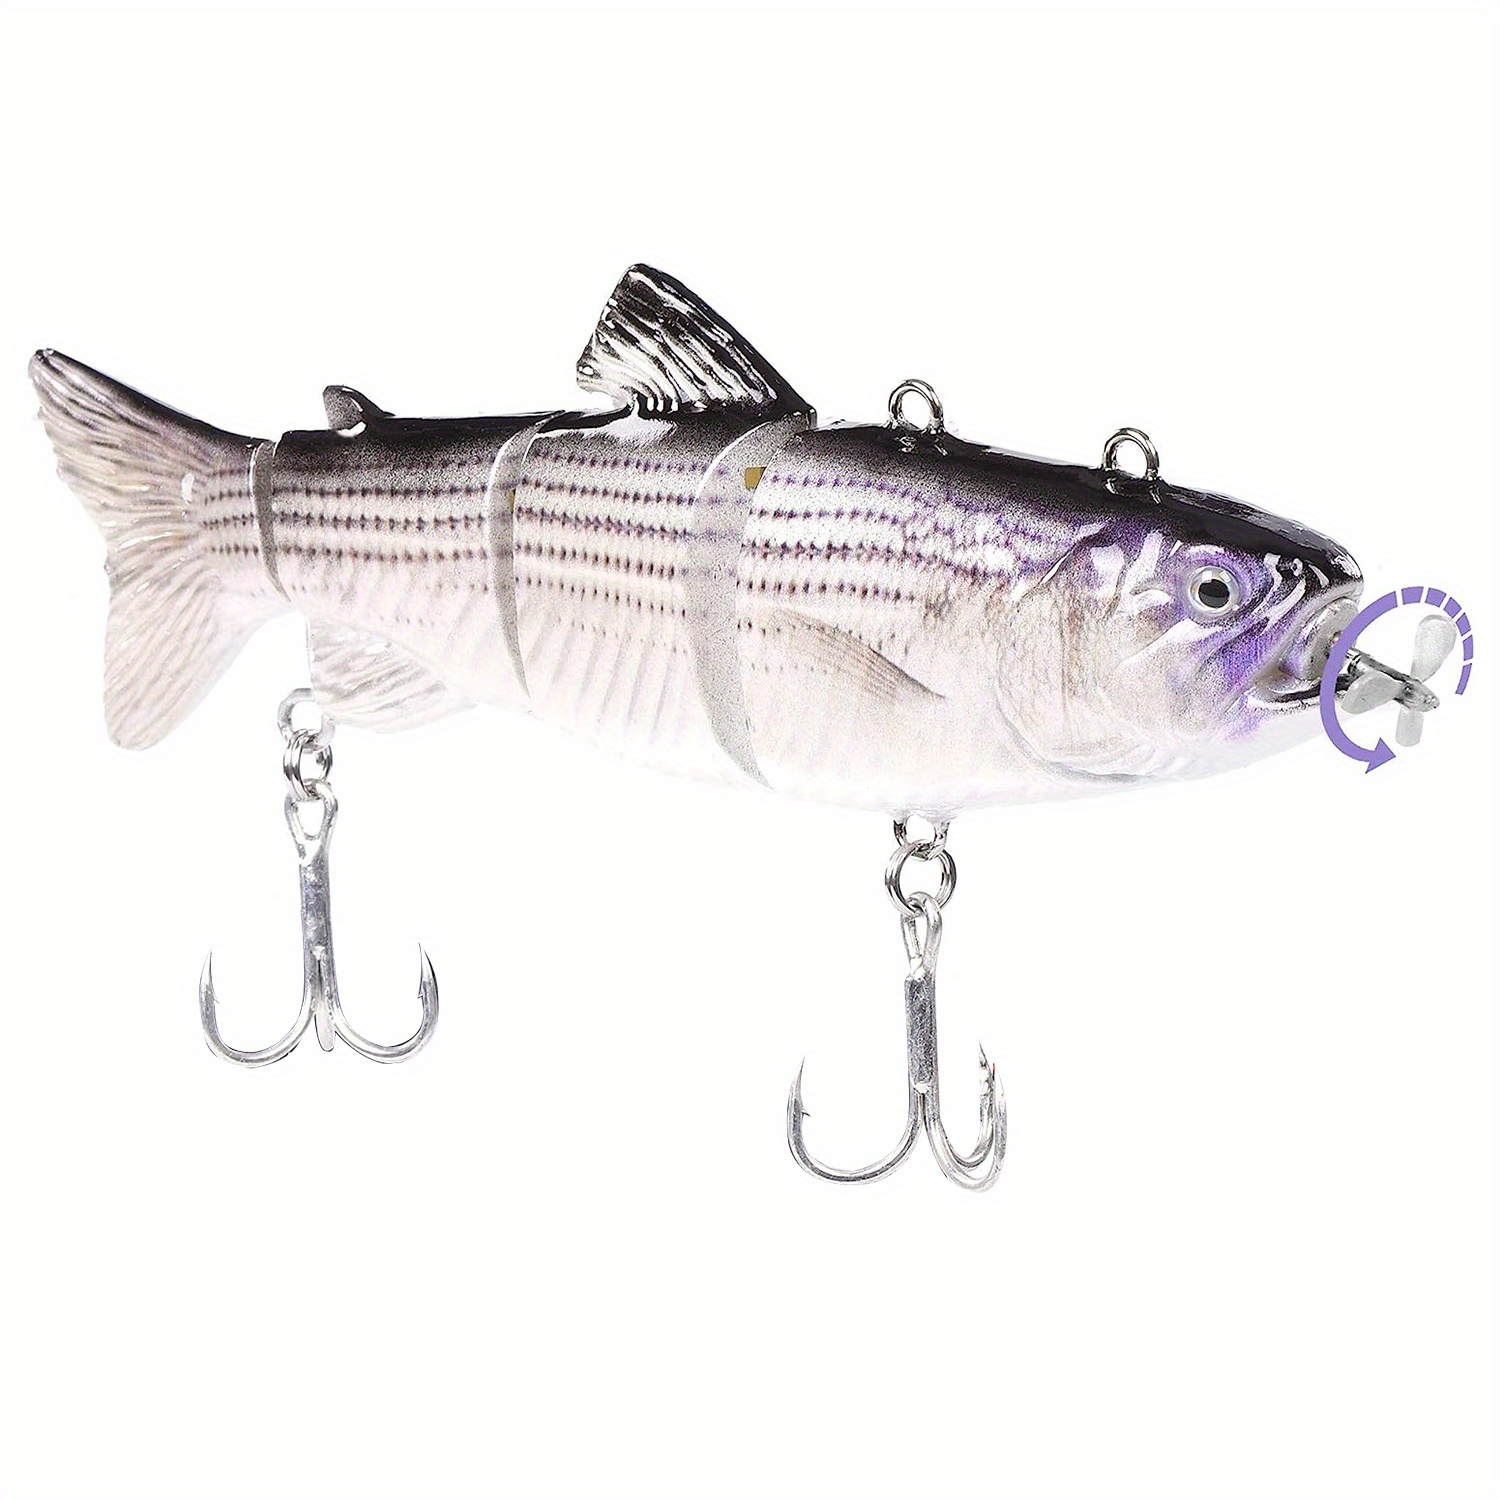  Robotic Swimming Fishing Bait Electric Lures 3.5 USB  Rechargeable LED Light Wobbler 4-Segement Multi Jointed Swimbait Hard Lures  Fishing Tackle : Sports & Outdoors